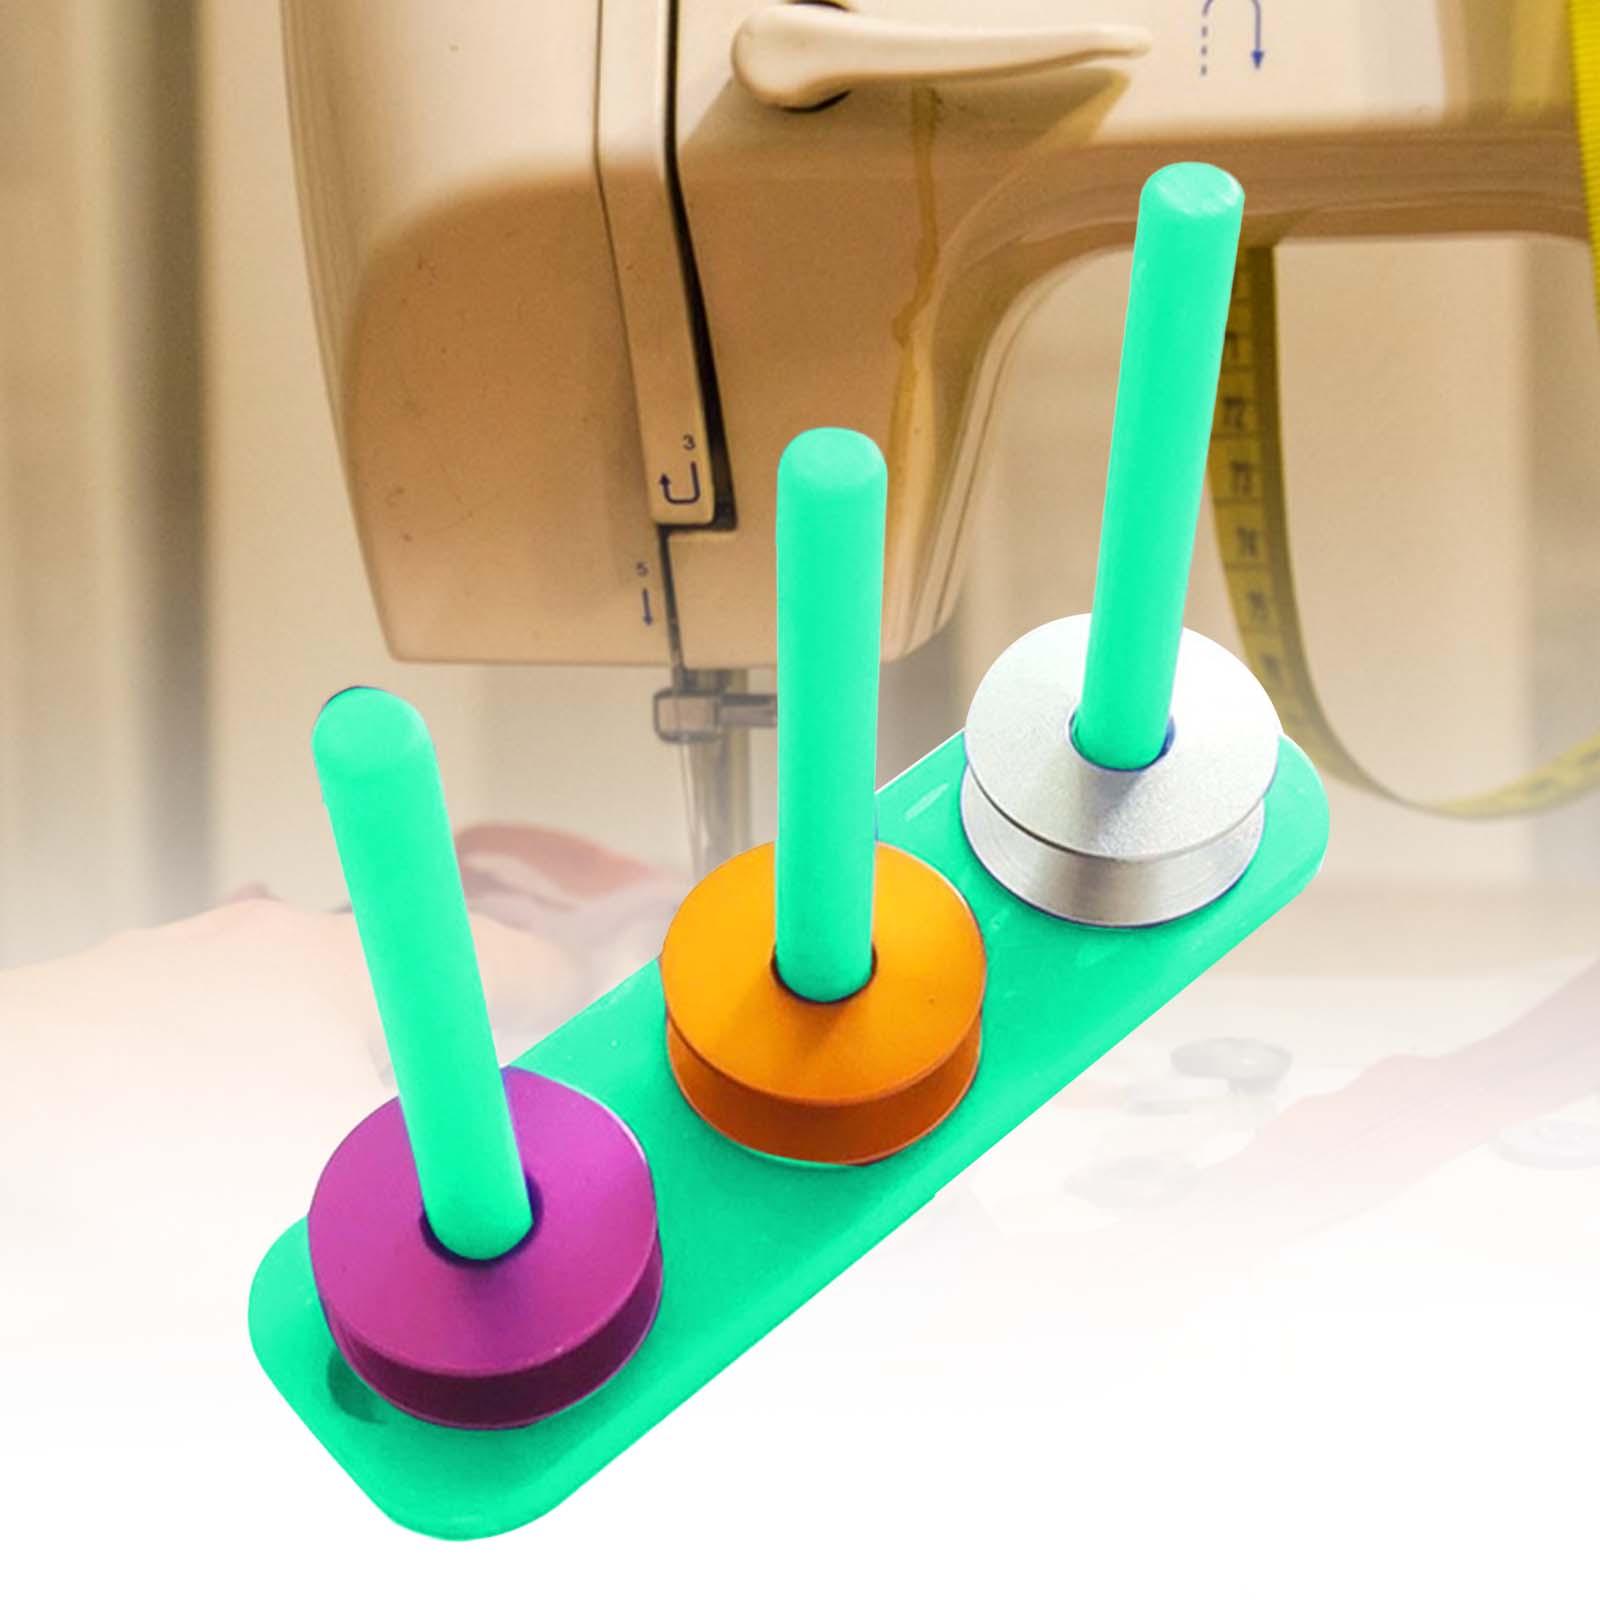 Bobbin Spool Stand Holder for Home Sewing Accessories Embroidery Accessories Green